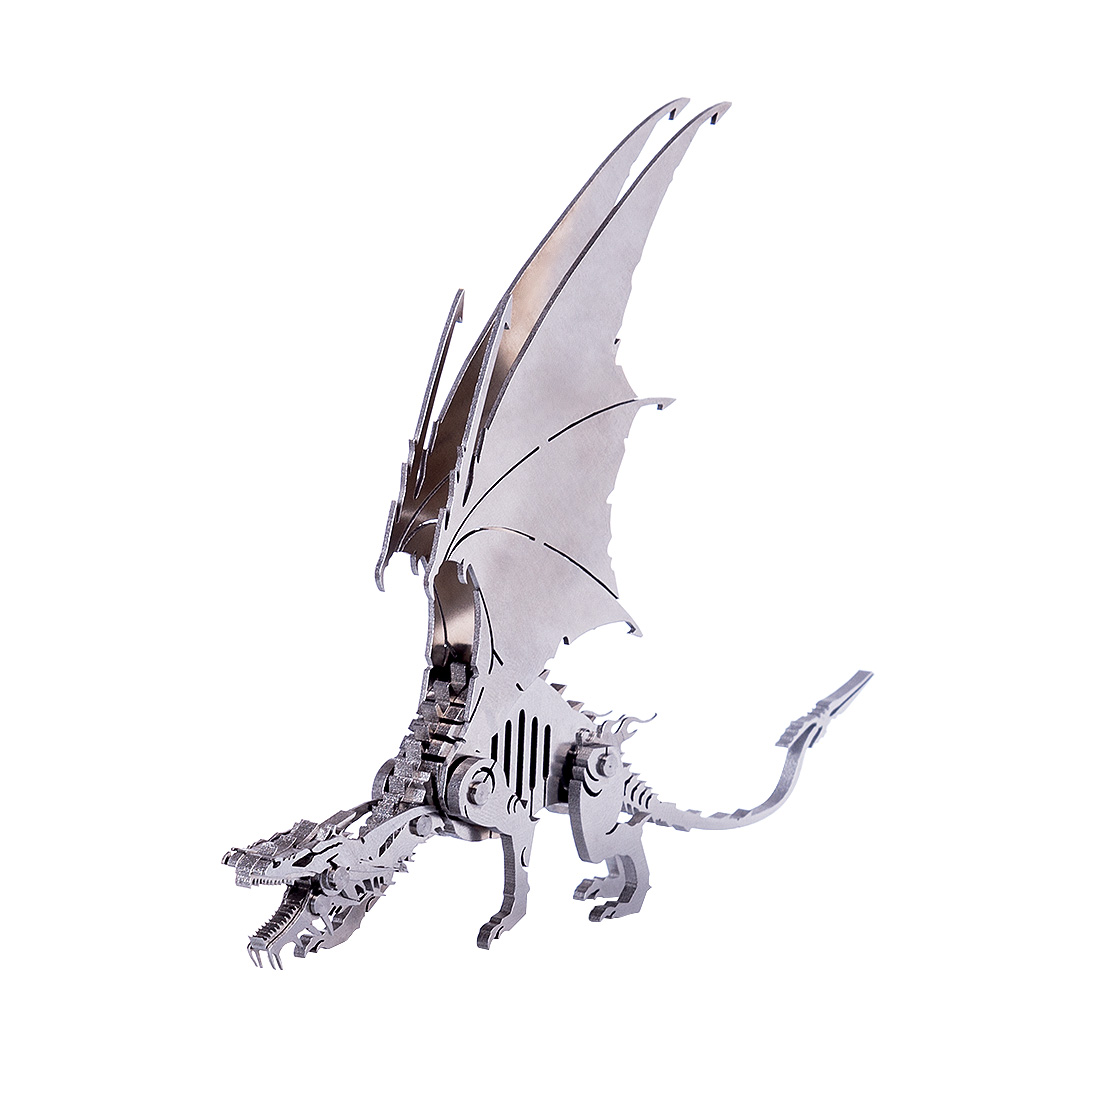 DIY Assembled Model Kit 3D Stainless Steel Assembled Detachable Model Puzzle Ornaments - Ice Dragon